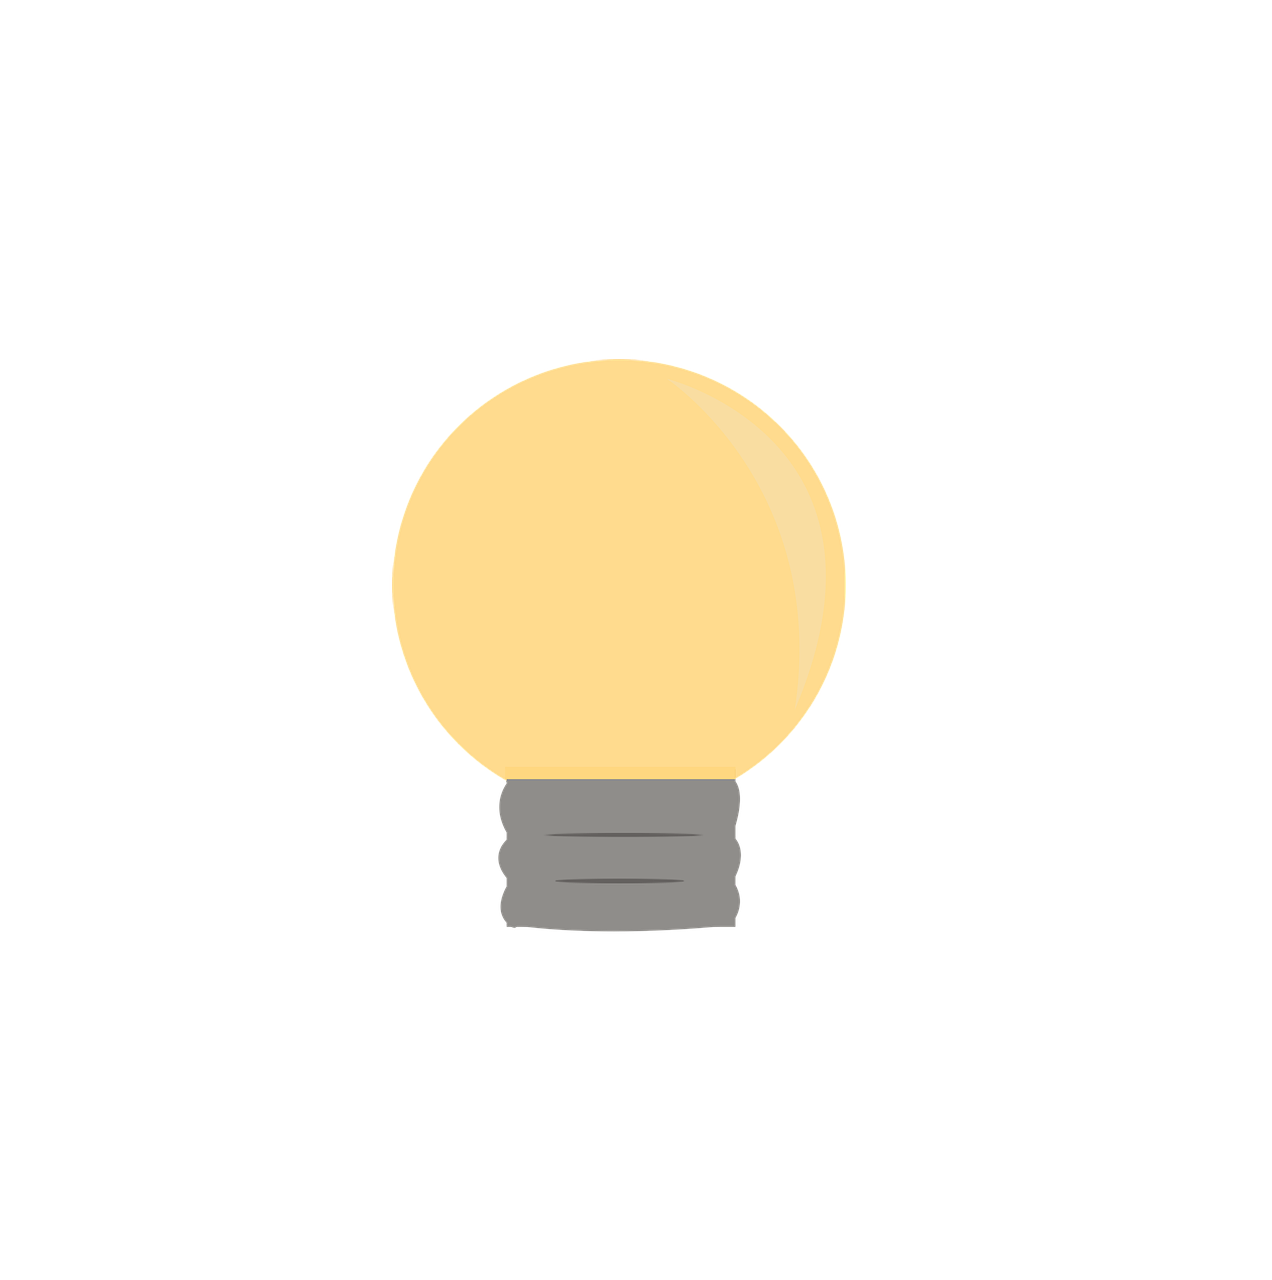 a light bulb on a black background, concept art, by Ivan Trush, minimalism, no gradients, yellowish full moon, game icon asset, flash animation